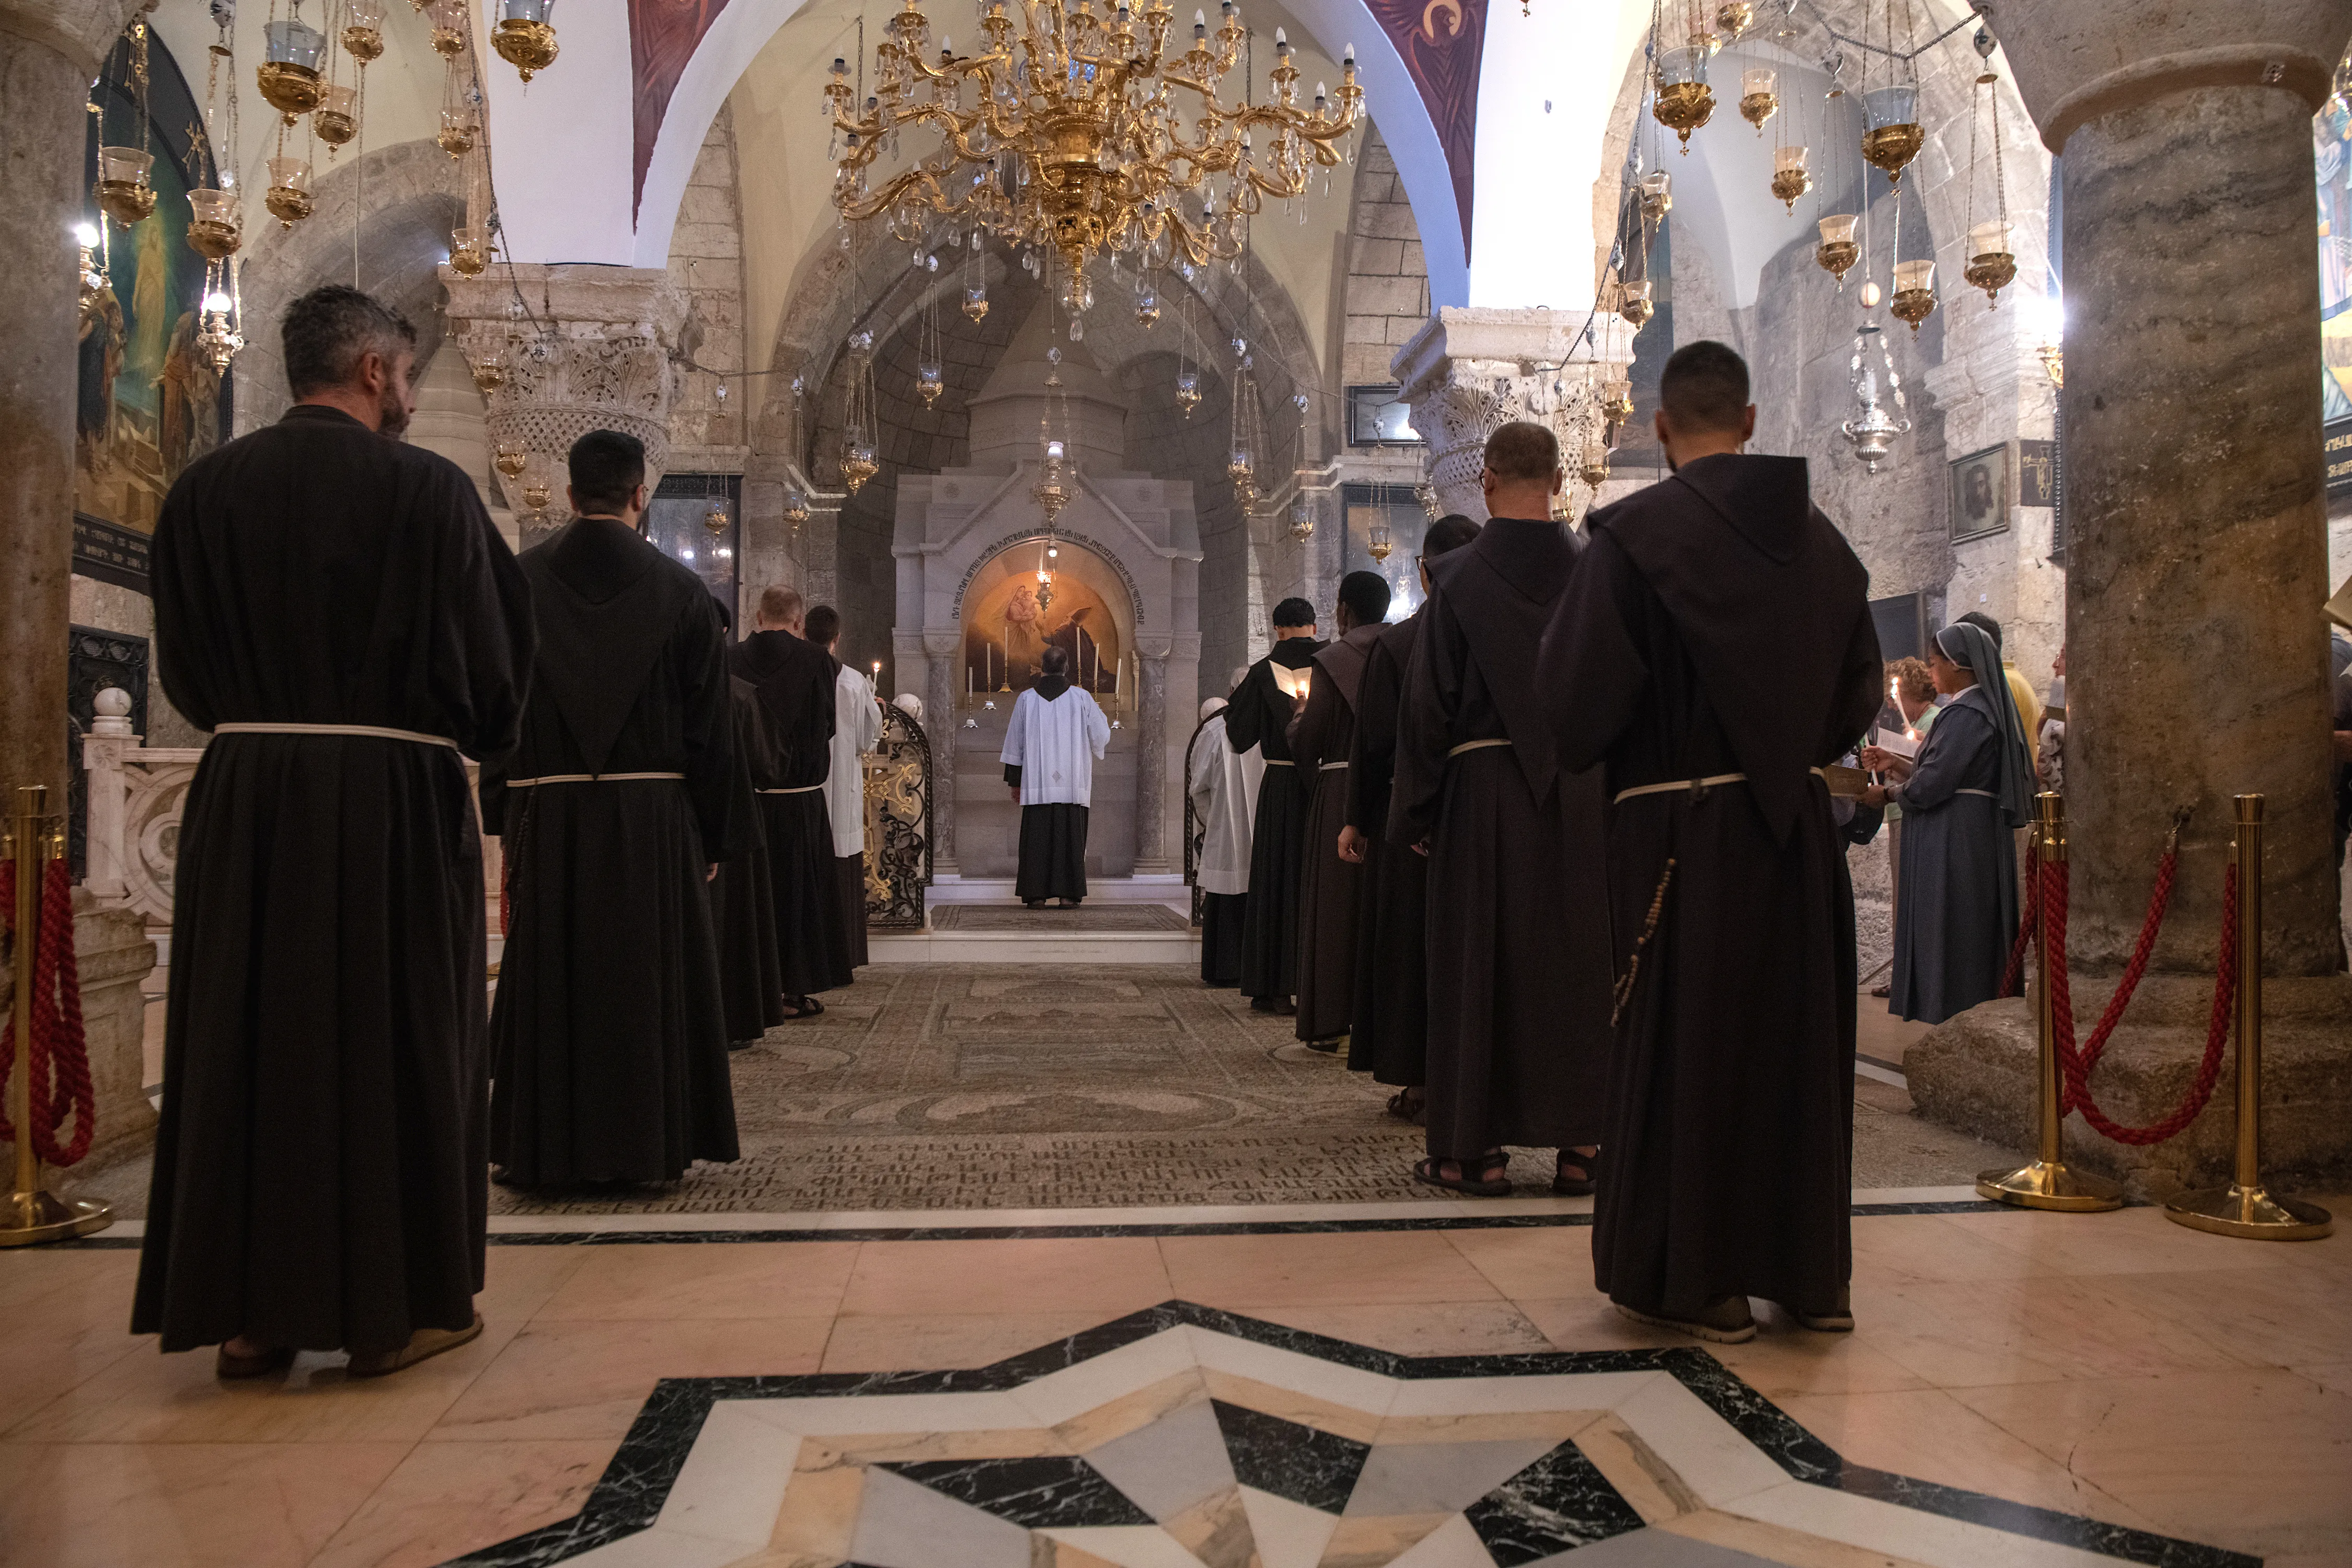 The daily procession of the Franciscan friars of the Custody of the Holy Land in the Basilica of the Holy Sepulcher. Due to the restoration works inside the basilica, Franciscans, as well as other communities, had to change the route of their processions. These are all issues that need to be discussed, as they fall within the Status Quo.?w=200&h=150